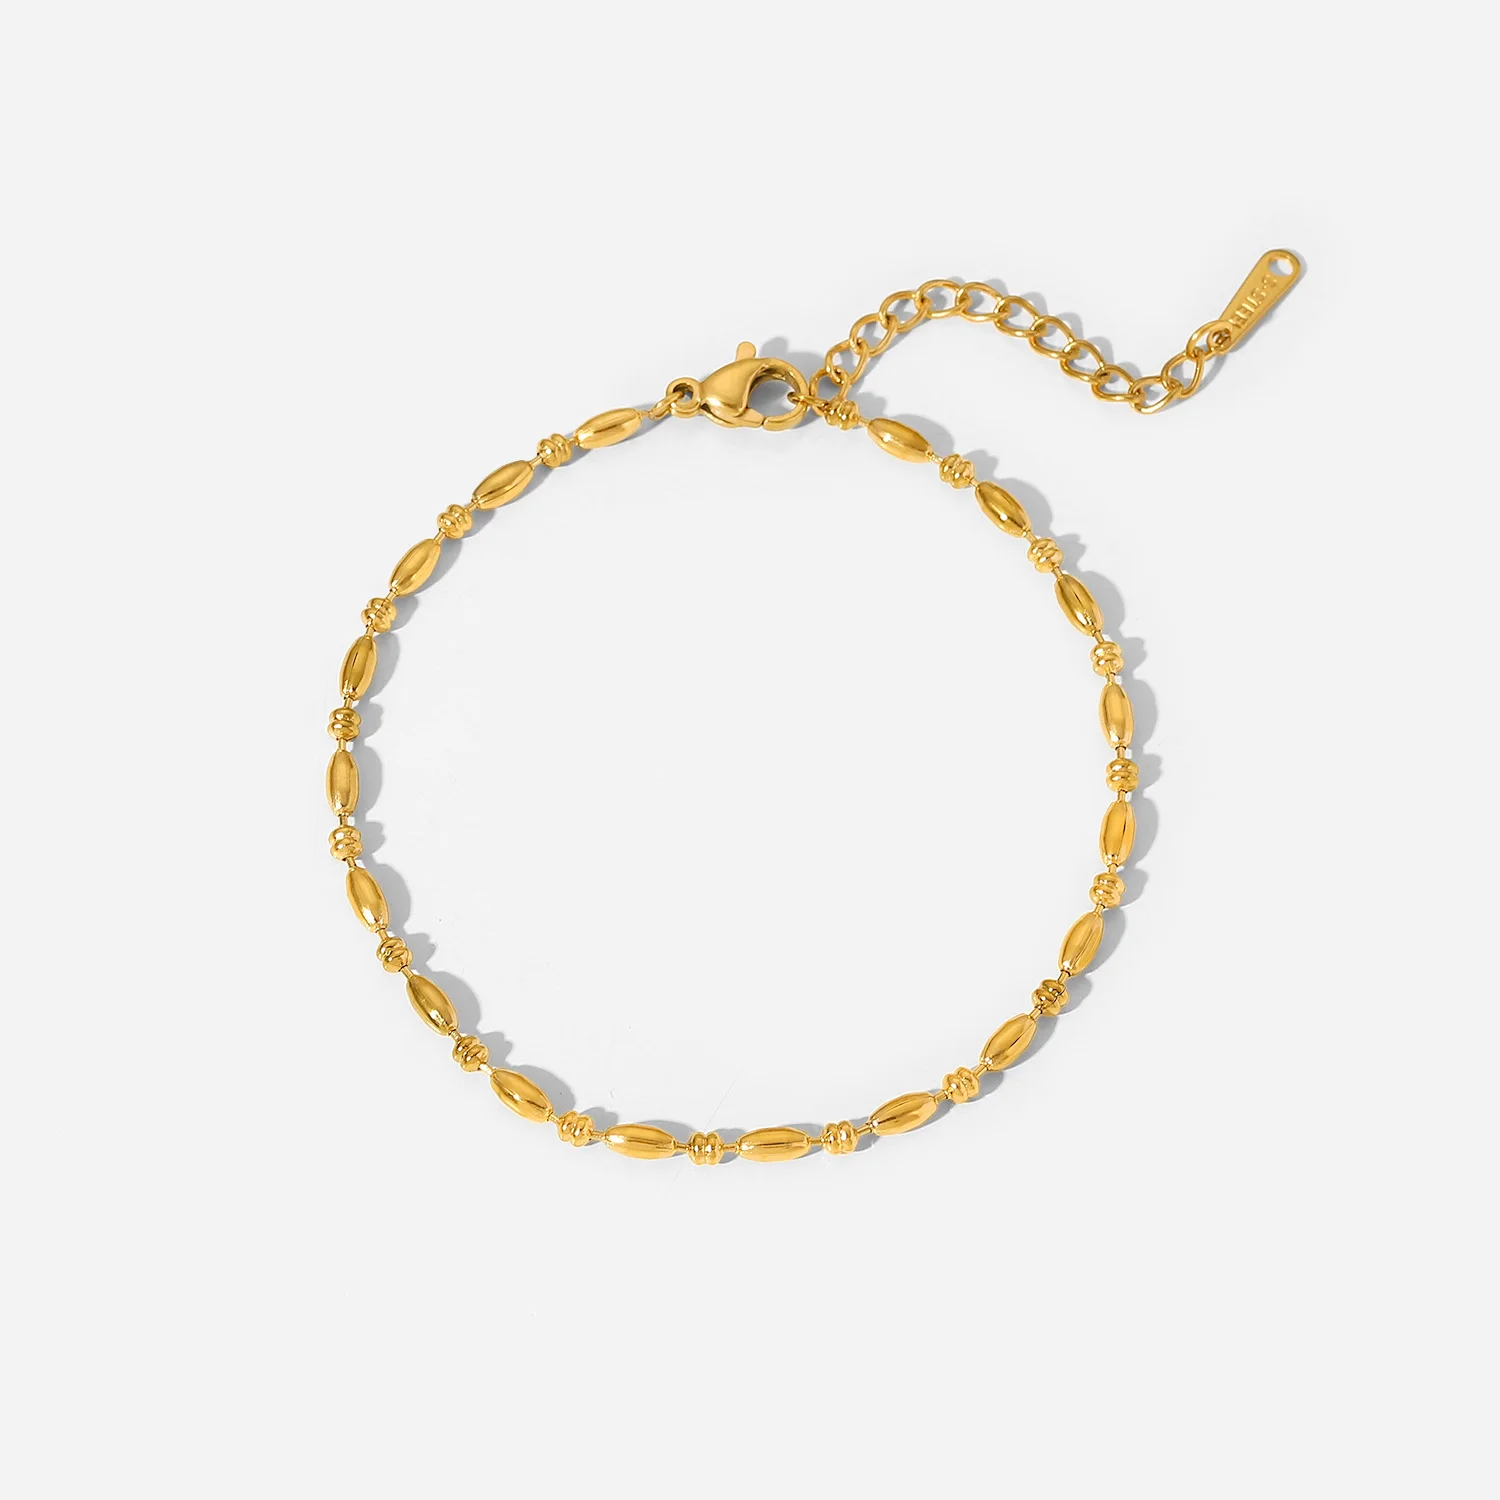 

Classic Oval Beads Pure Chain Minimalist Stainless Steel 18K Gold-plated Jewelry Bracelet For Women